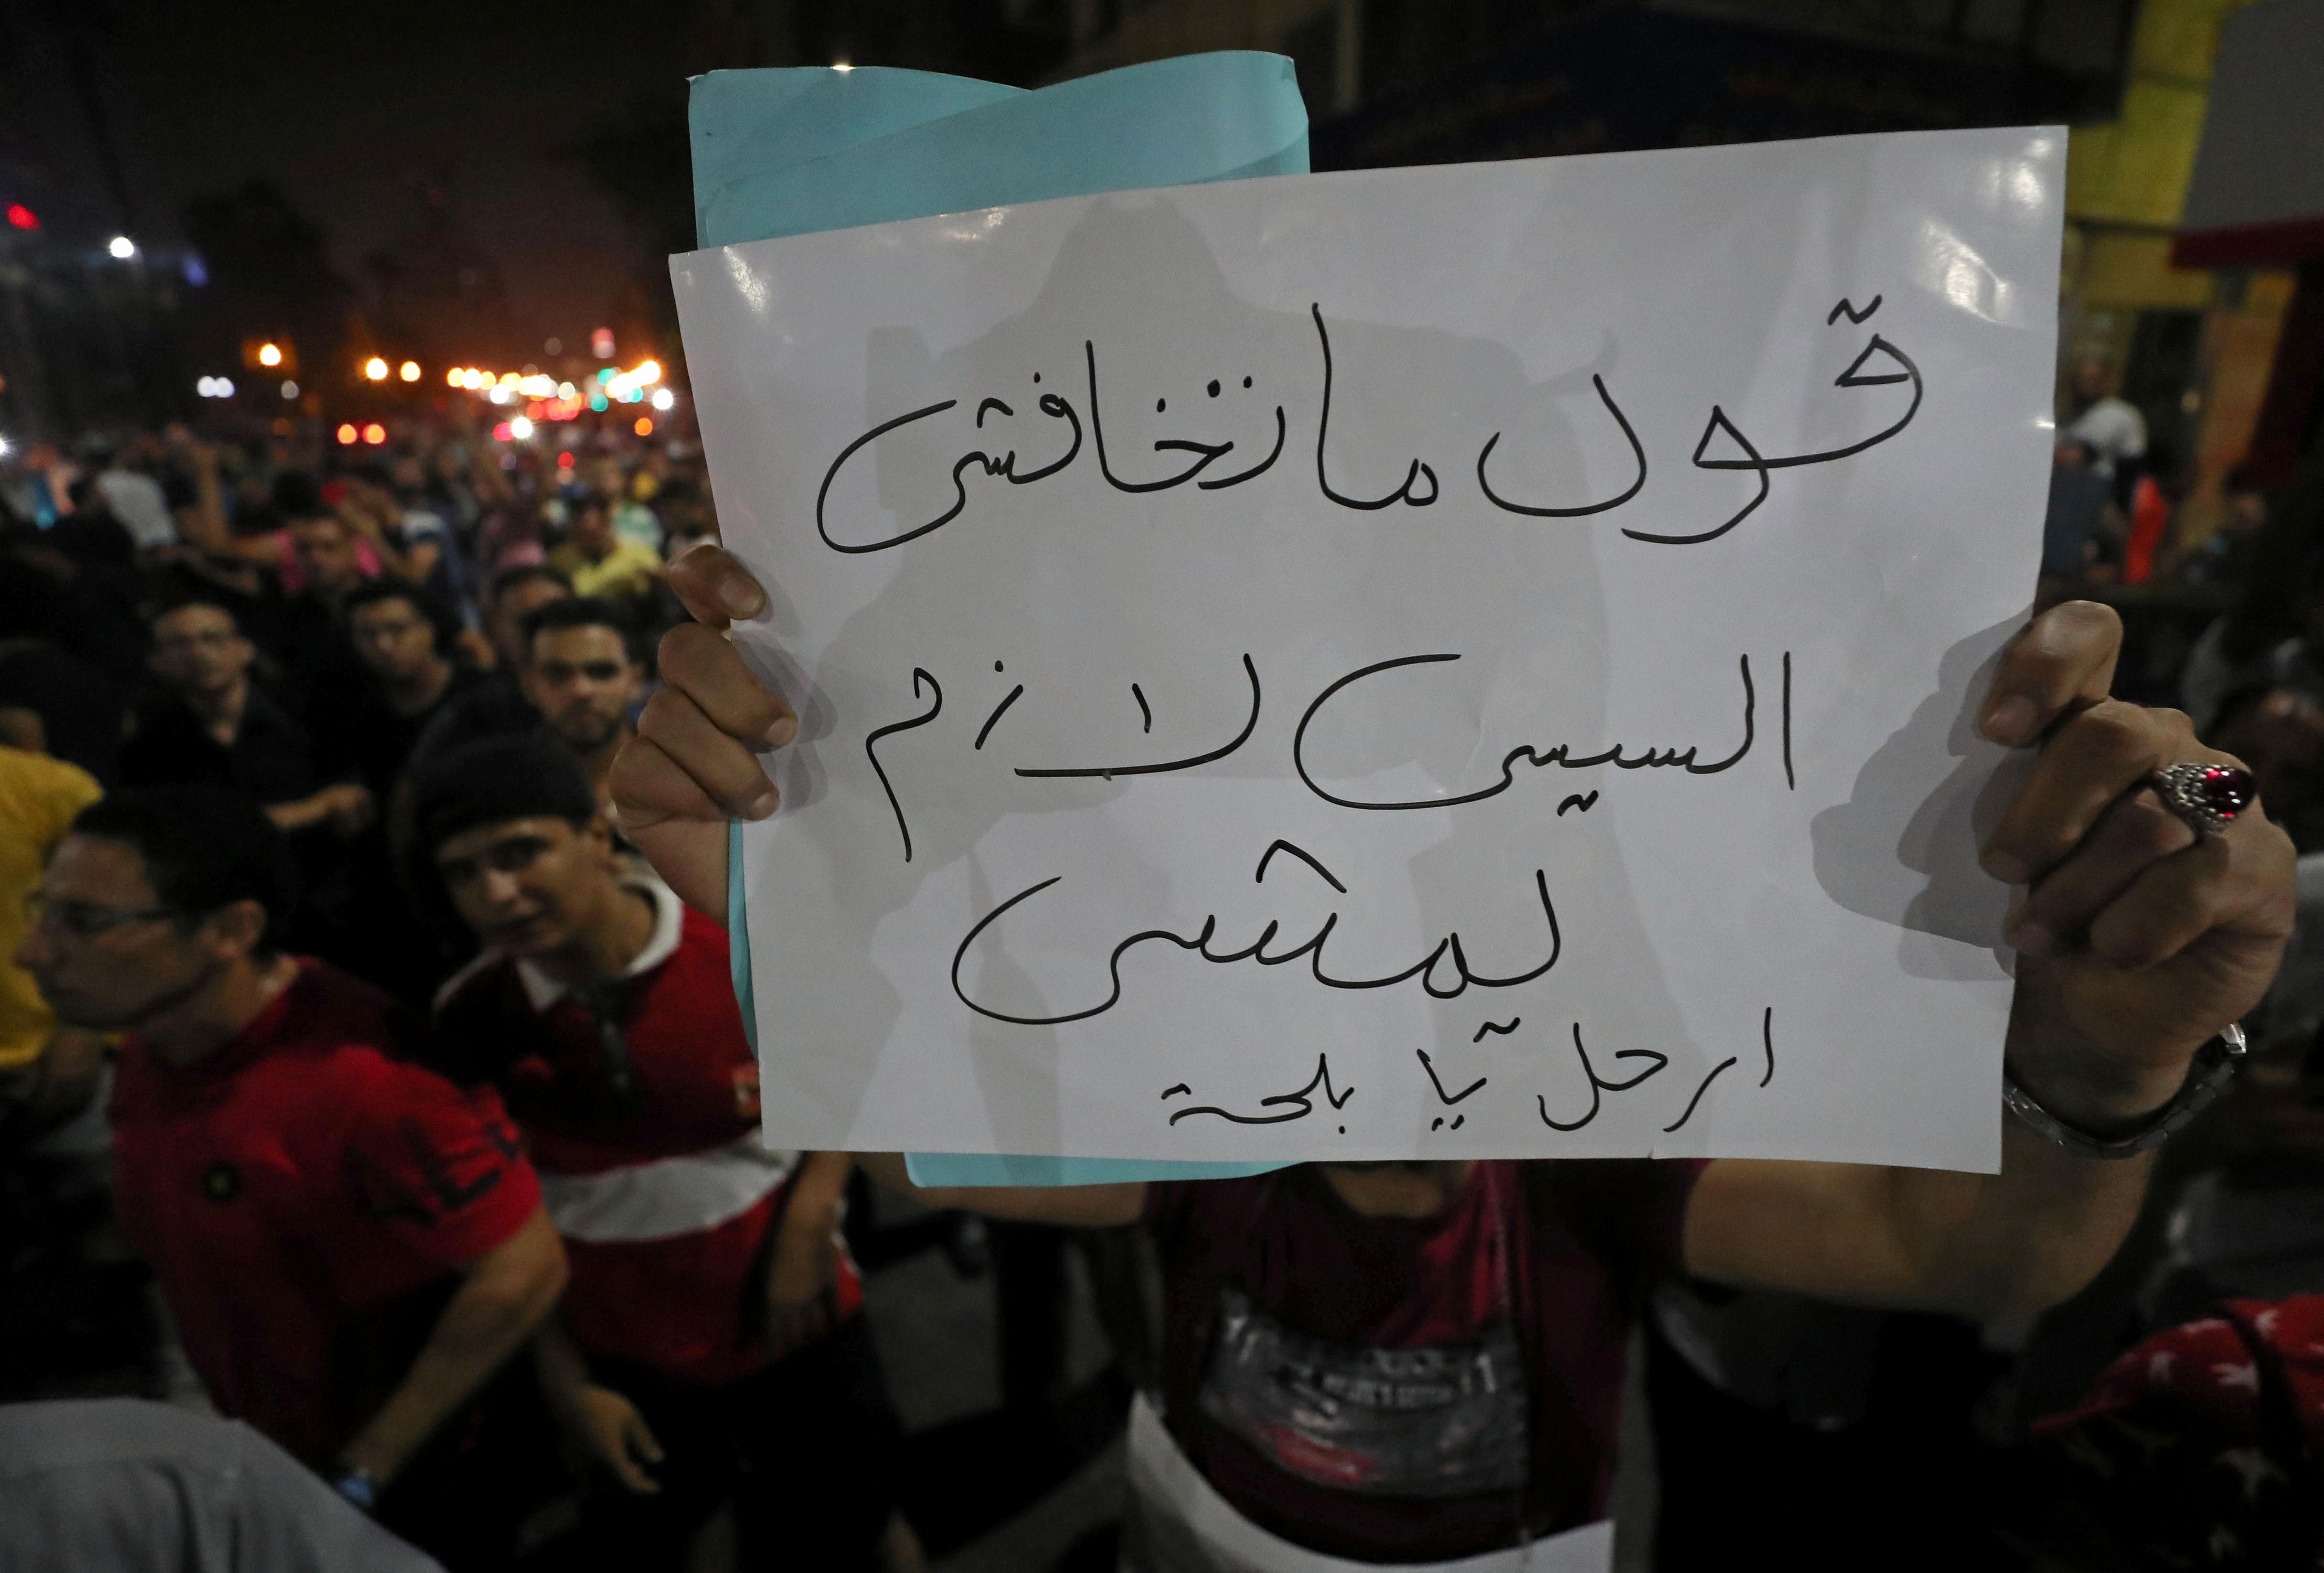 A protester carries a sign that reads "Don't be afraid ..say .. Sisi must leave" while protesters gather in central Cairo shouting anti-government slogans in Cairo, Egypt on 21 September (Reuters)